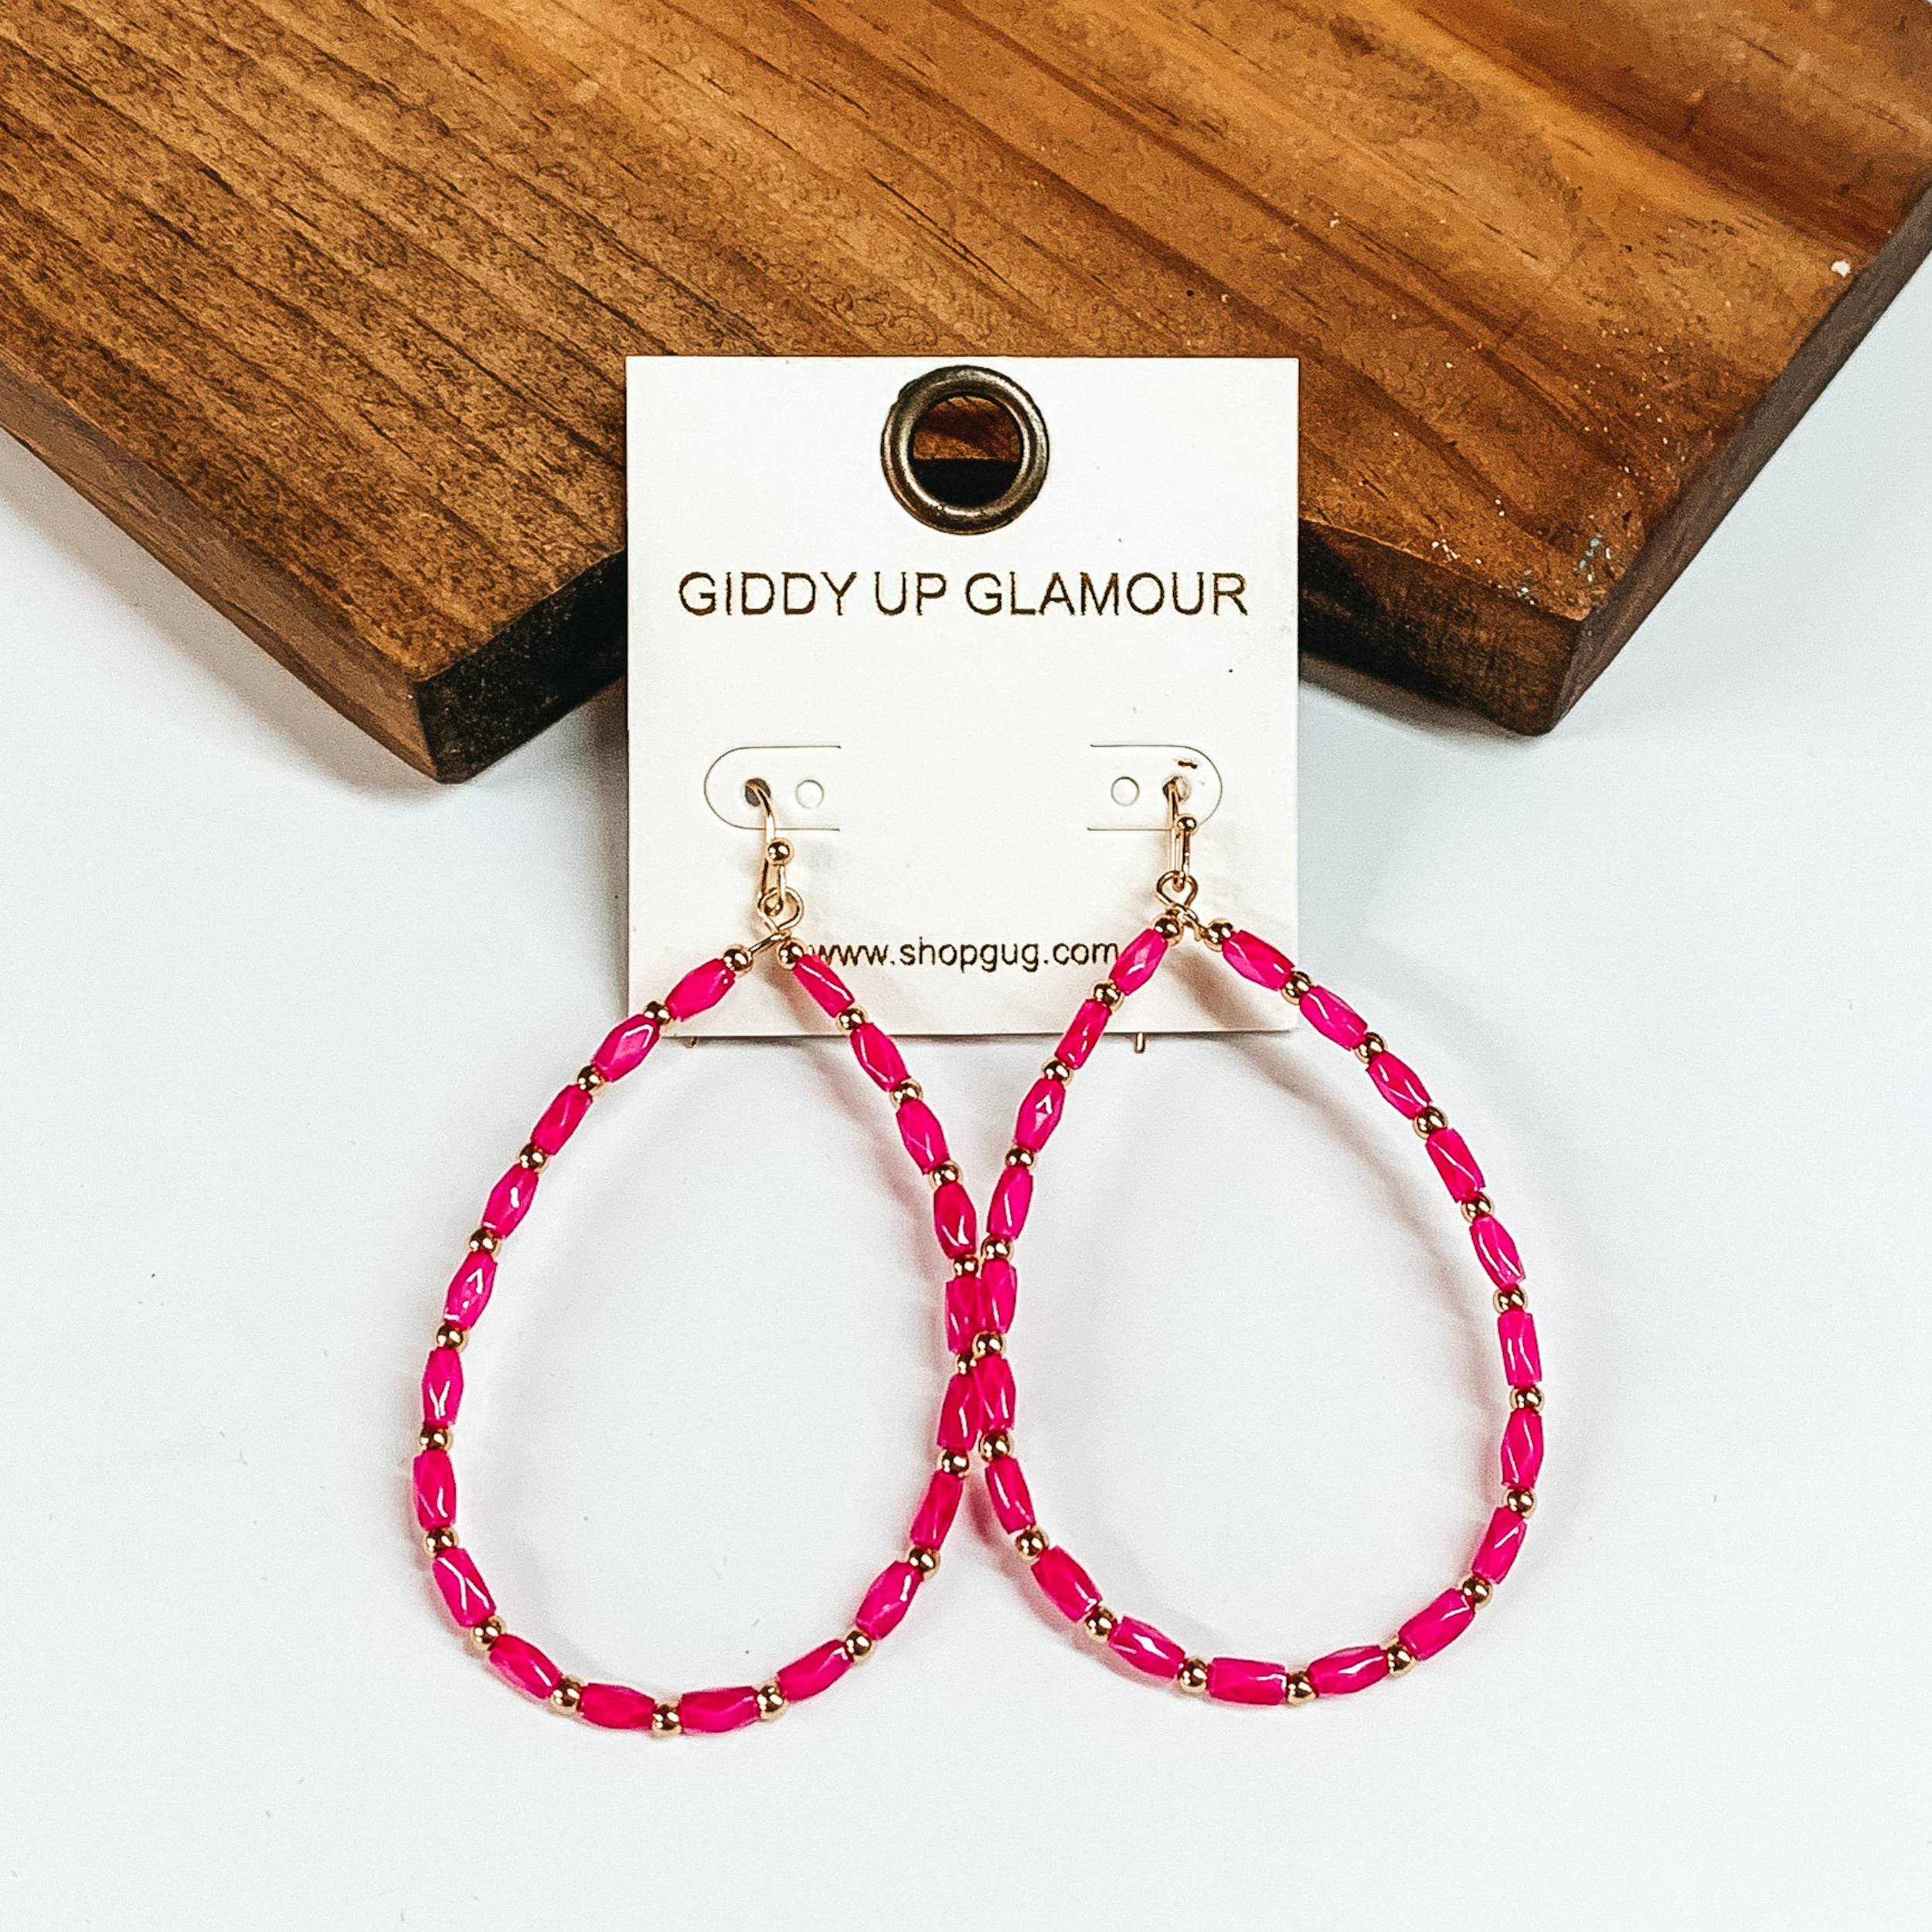 Hot pink beads spaced with gold round beads create a teardrop earrings that is perfect for everyone! The earrings are placed on white and wood board. 